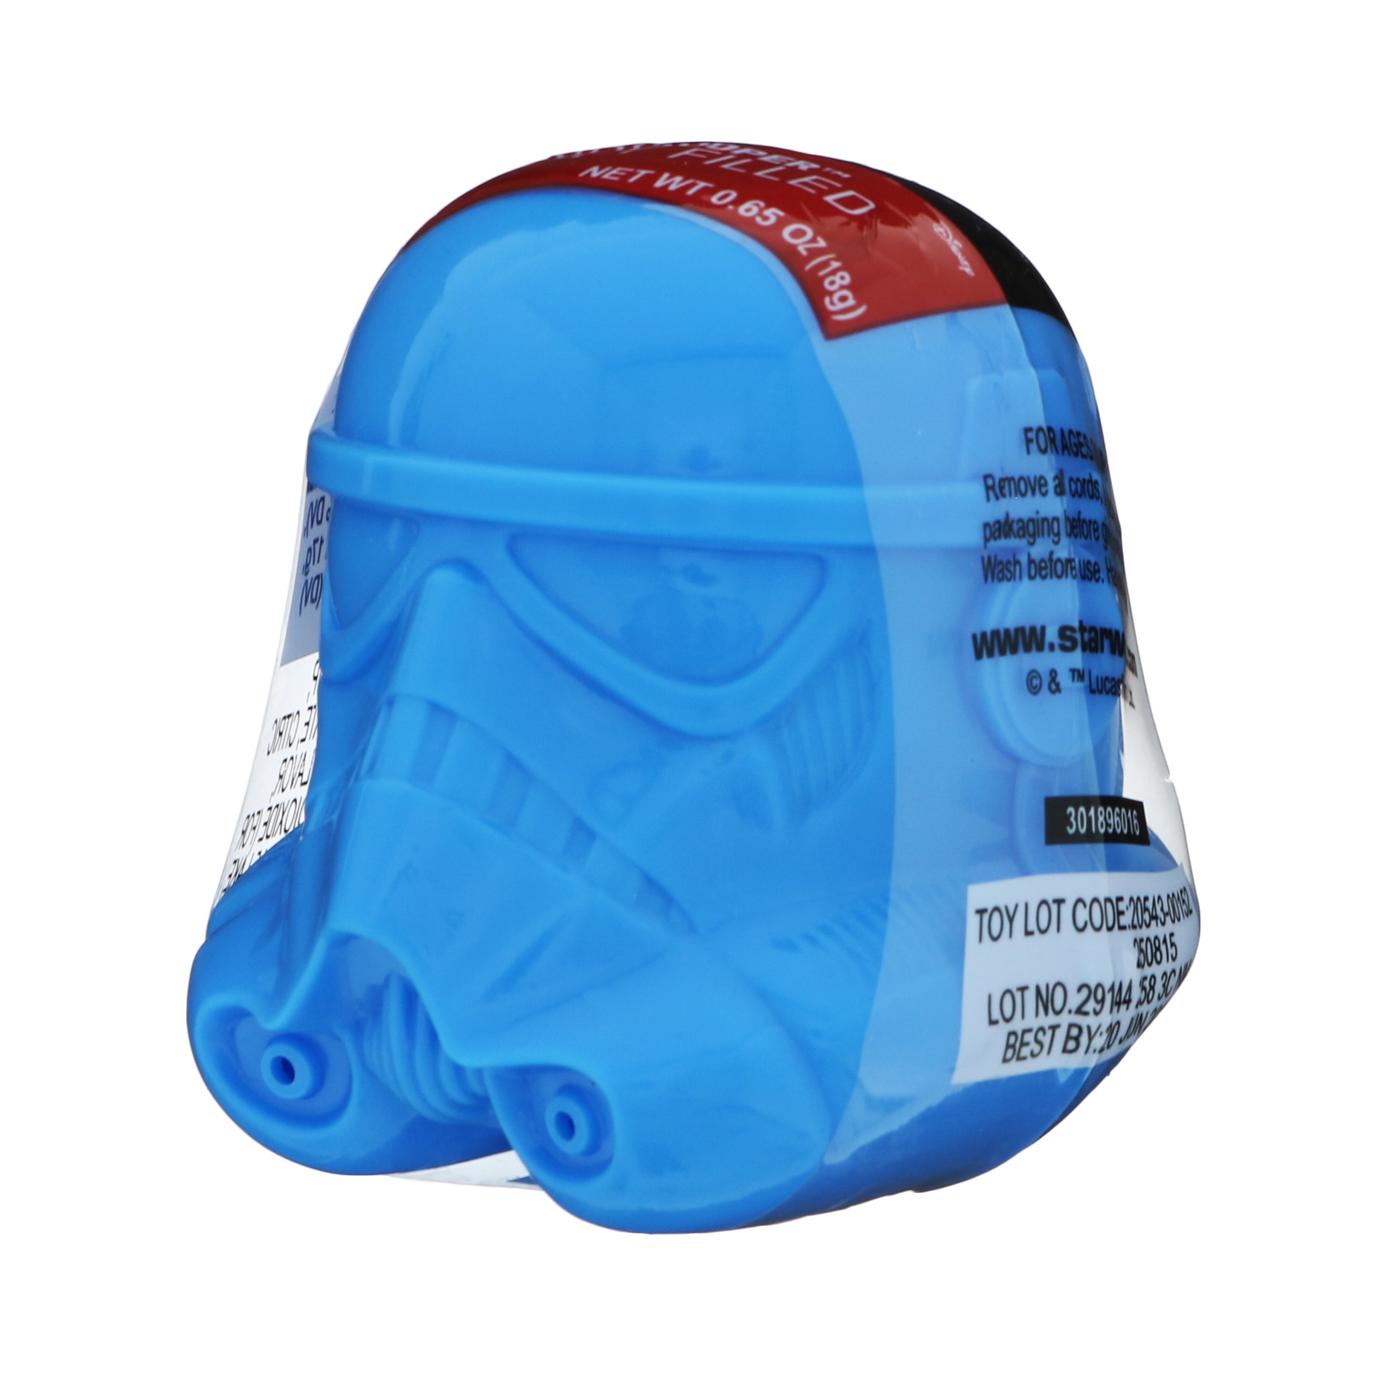 Star Wars Single Egg w/candy; image 4 of 7